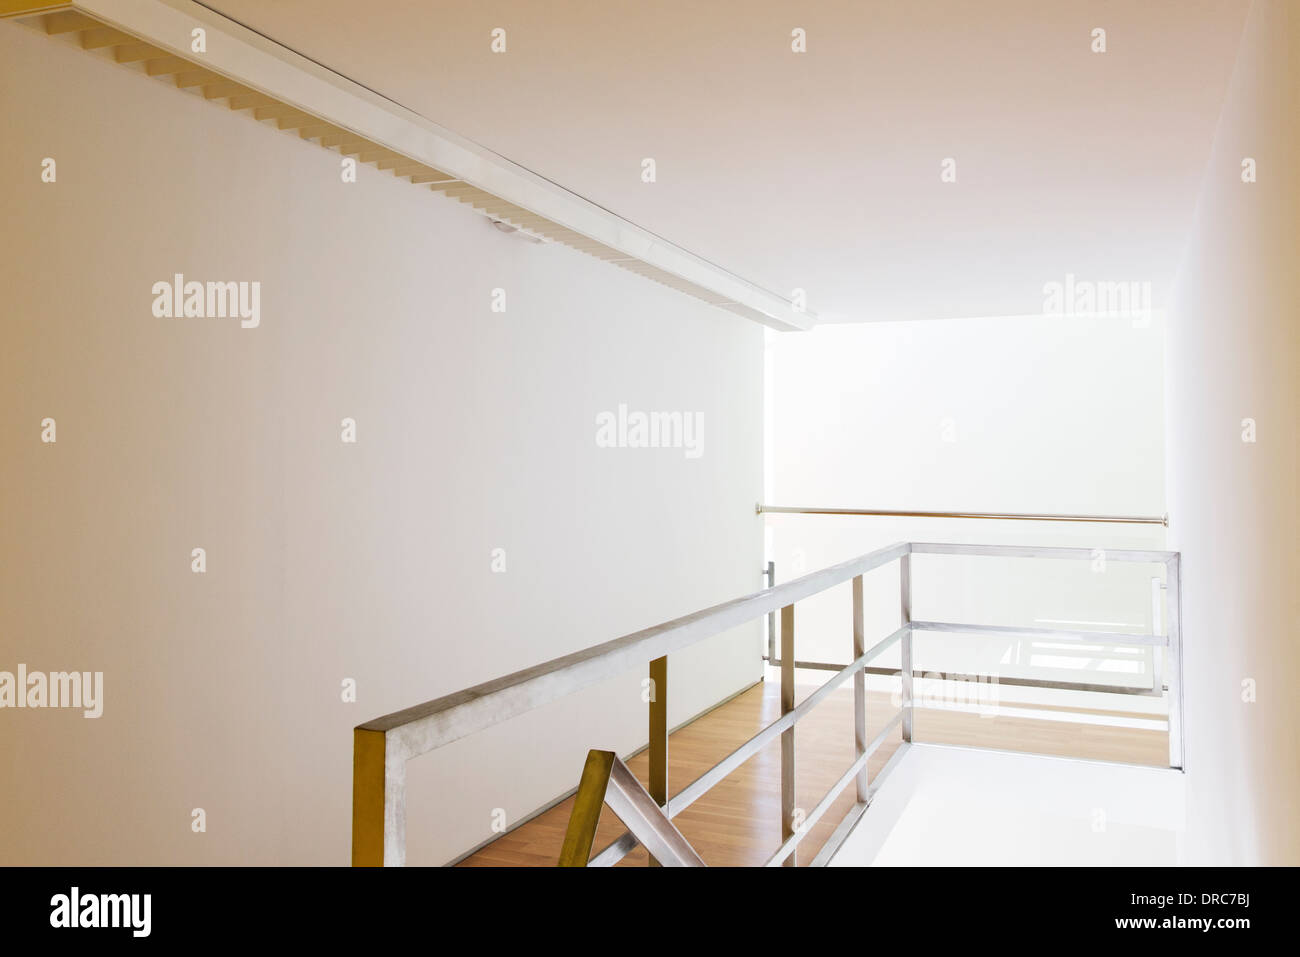 Railing and corridor in office Stock Photo